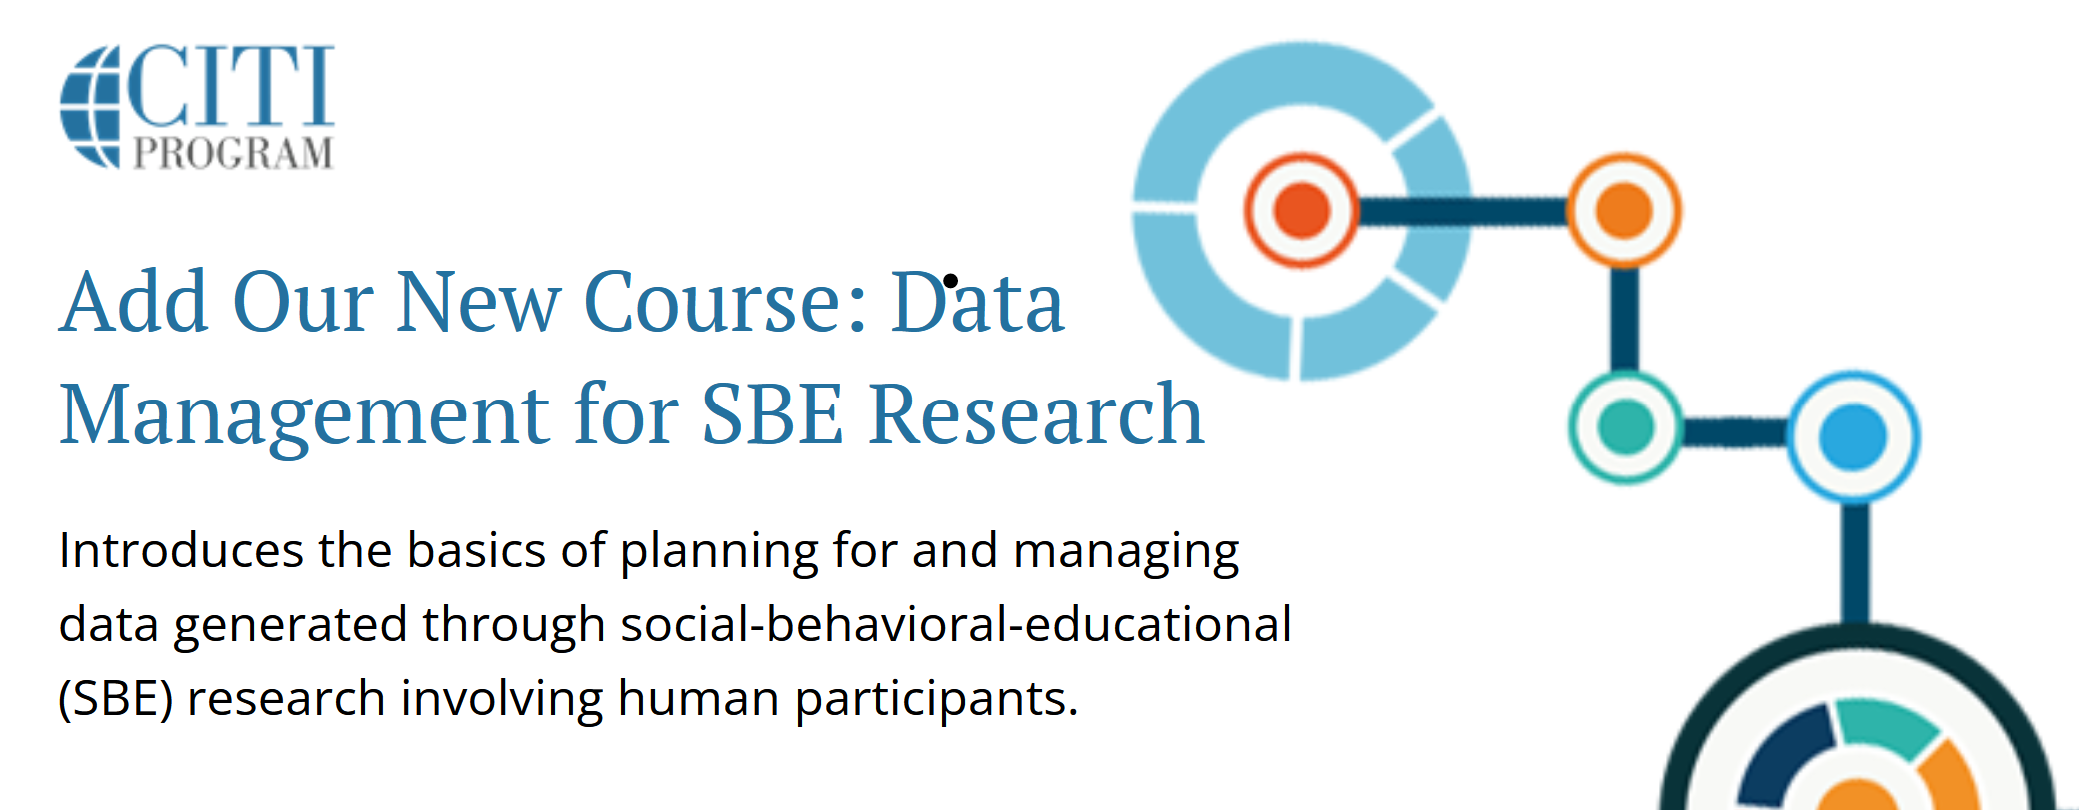 Add Our New Course: Data Management for SBE Research. Introduces the basics of planning for and managing data generated through social-behavioral-educational (SBE) research involving human participants.